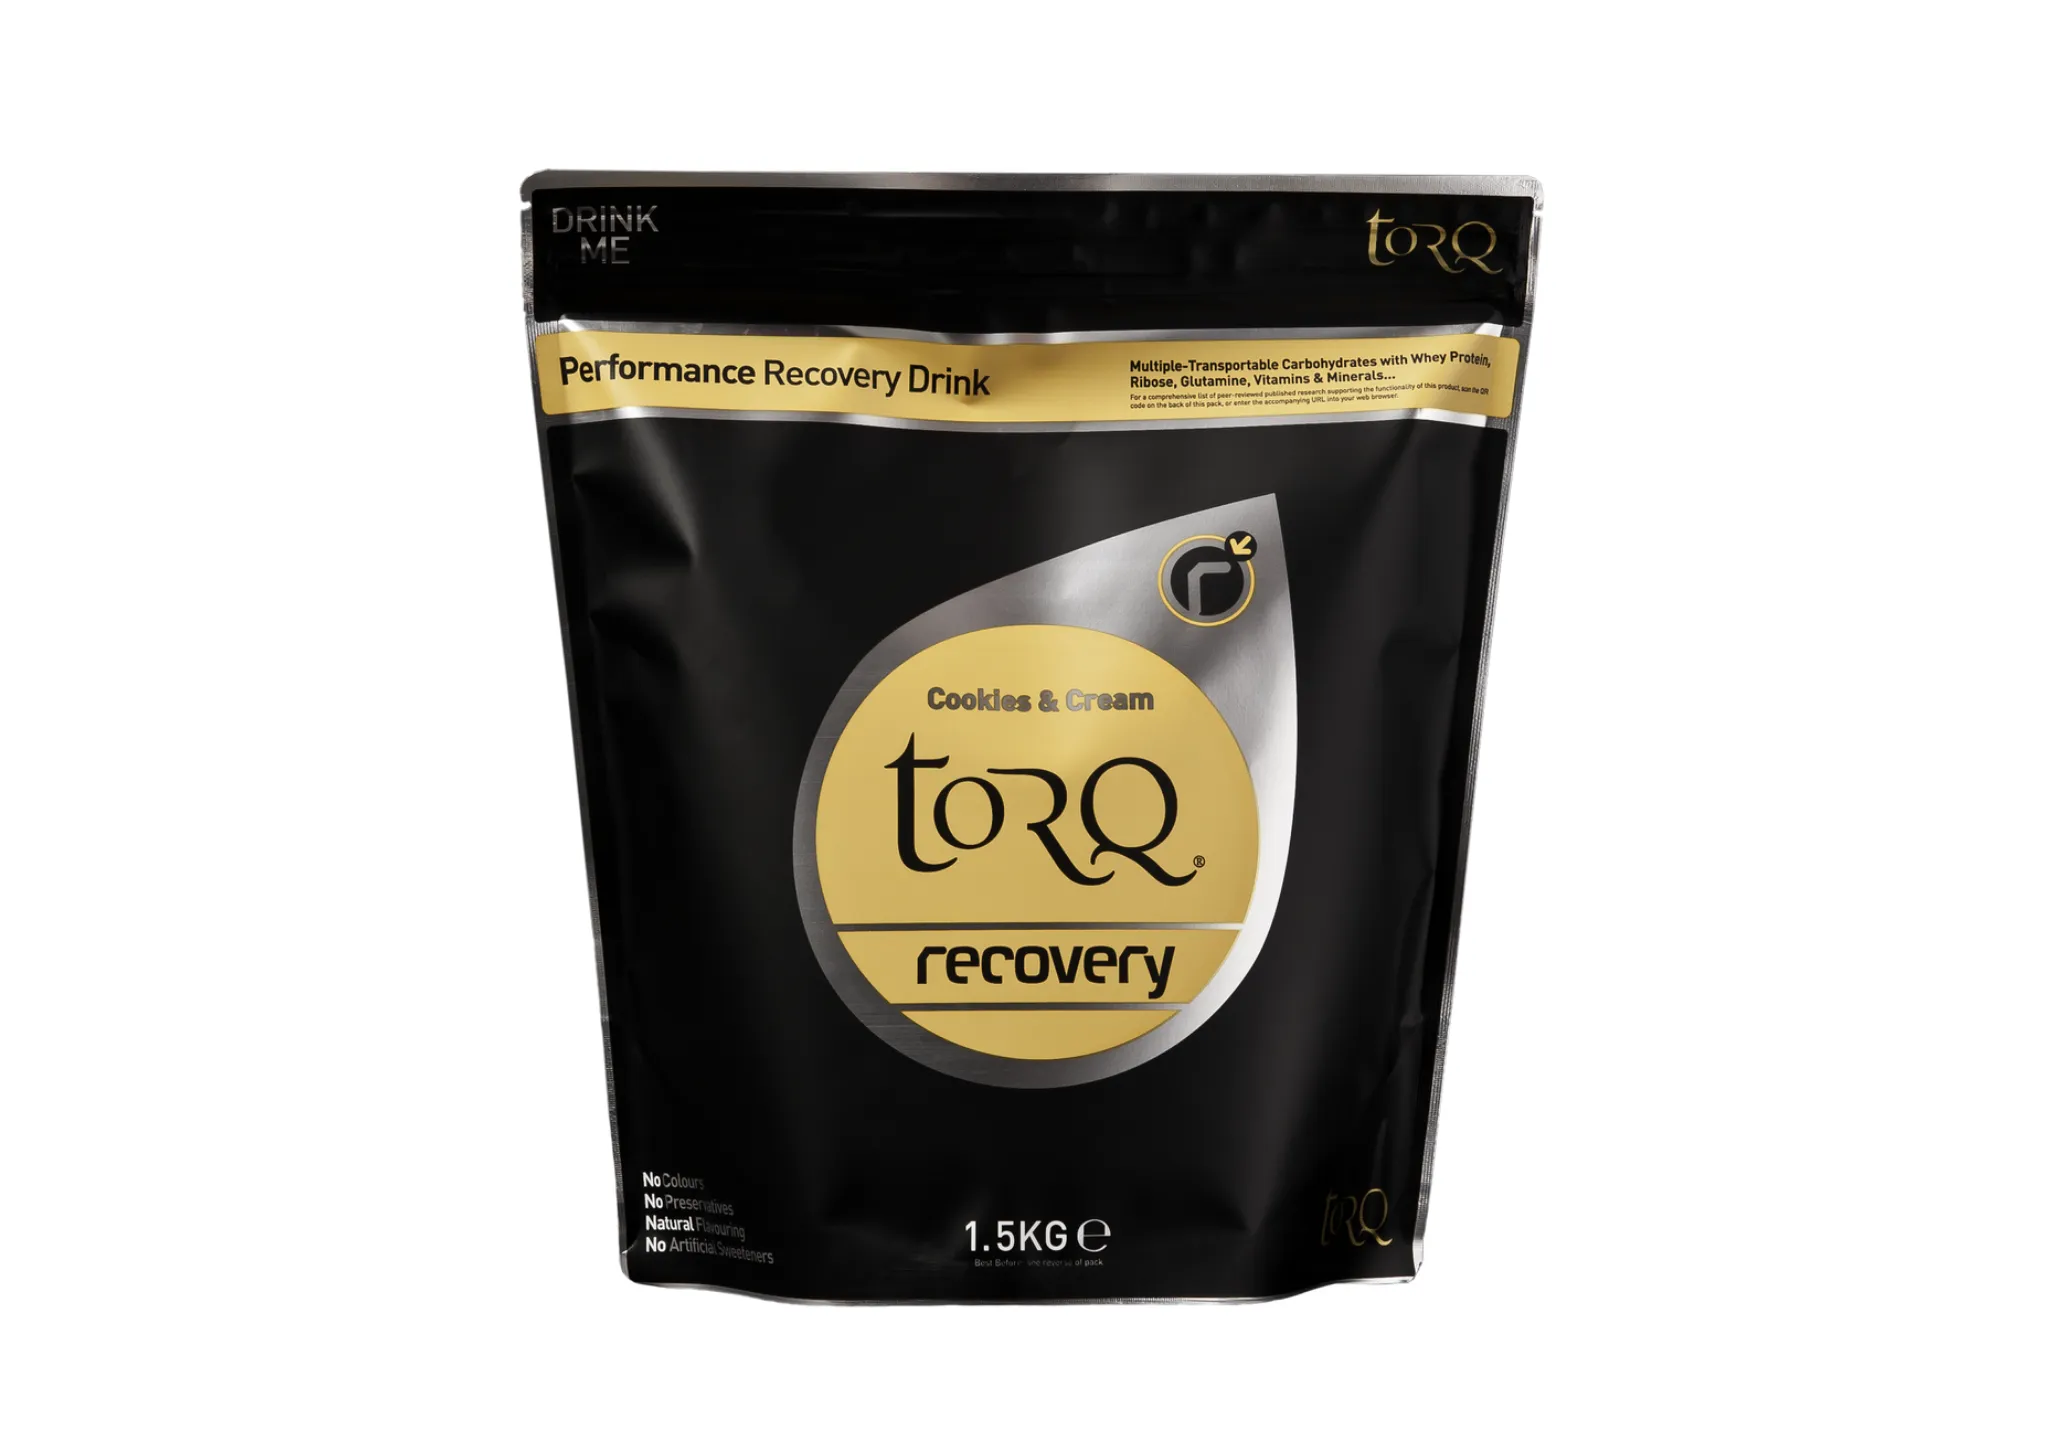 TORQ Recovery Drink 1.5KG